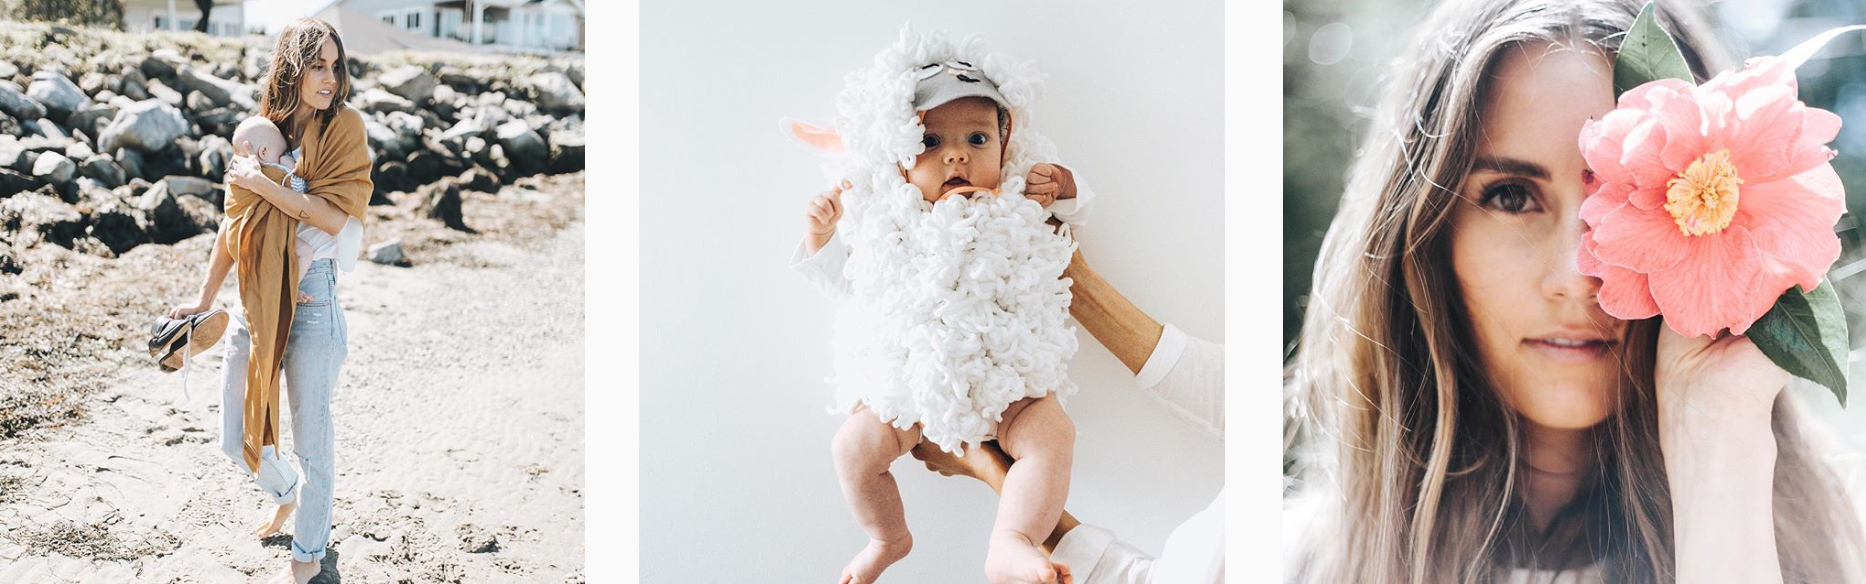 5 Cool Moms to Follow on Instagram - PLANOLY Blog - Mother's Day - Bethany Menzel